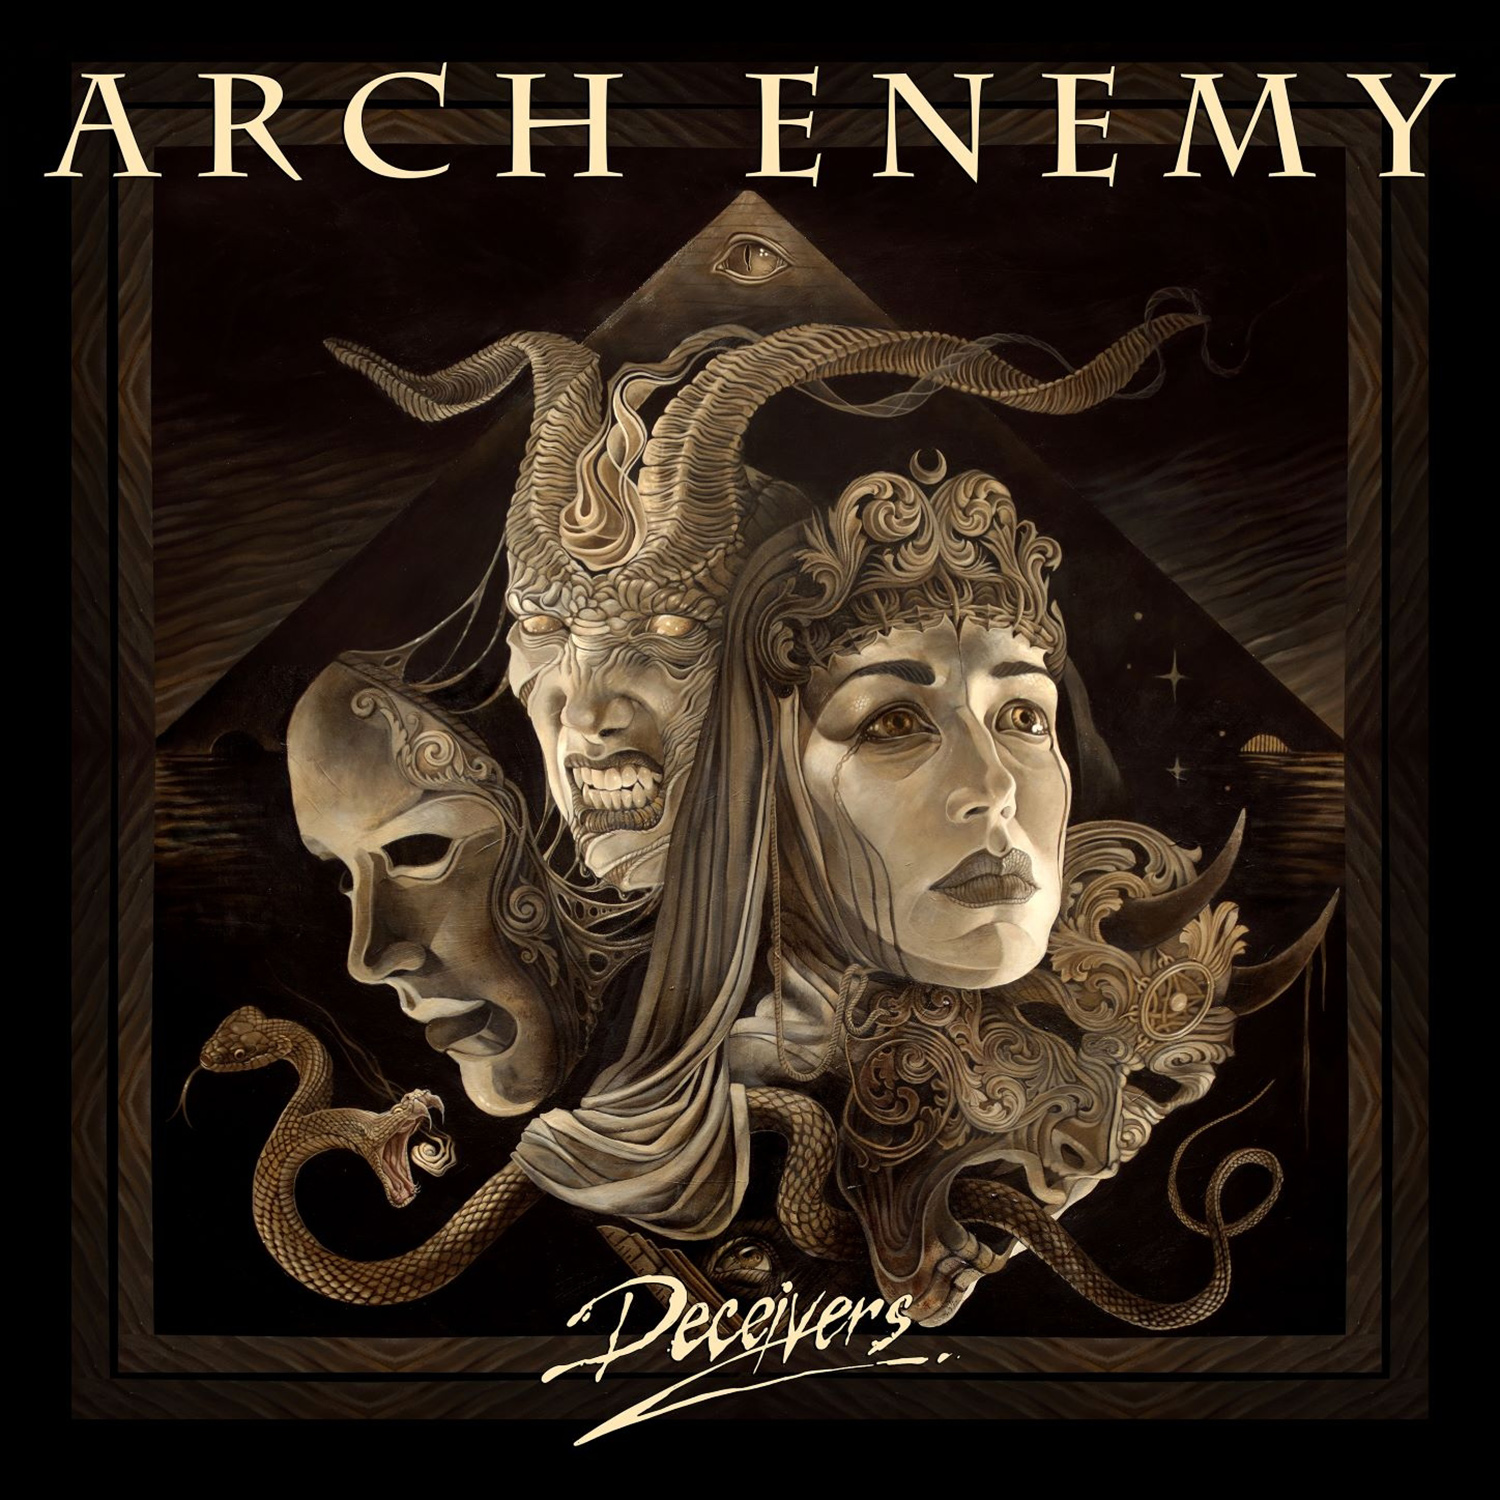 Artwork for the album ‘Deceivers’ by Arch Enemy